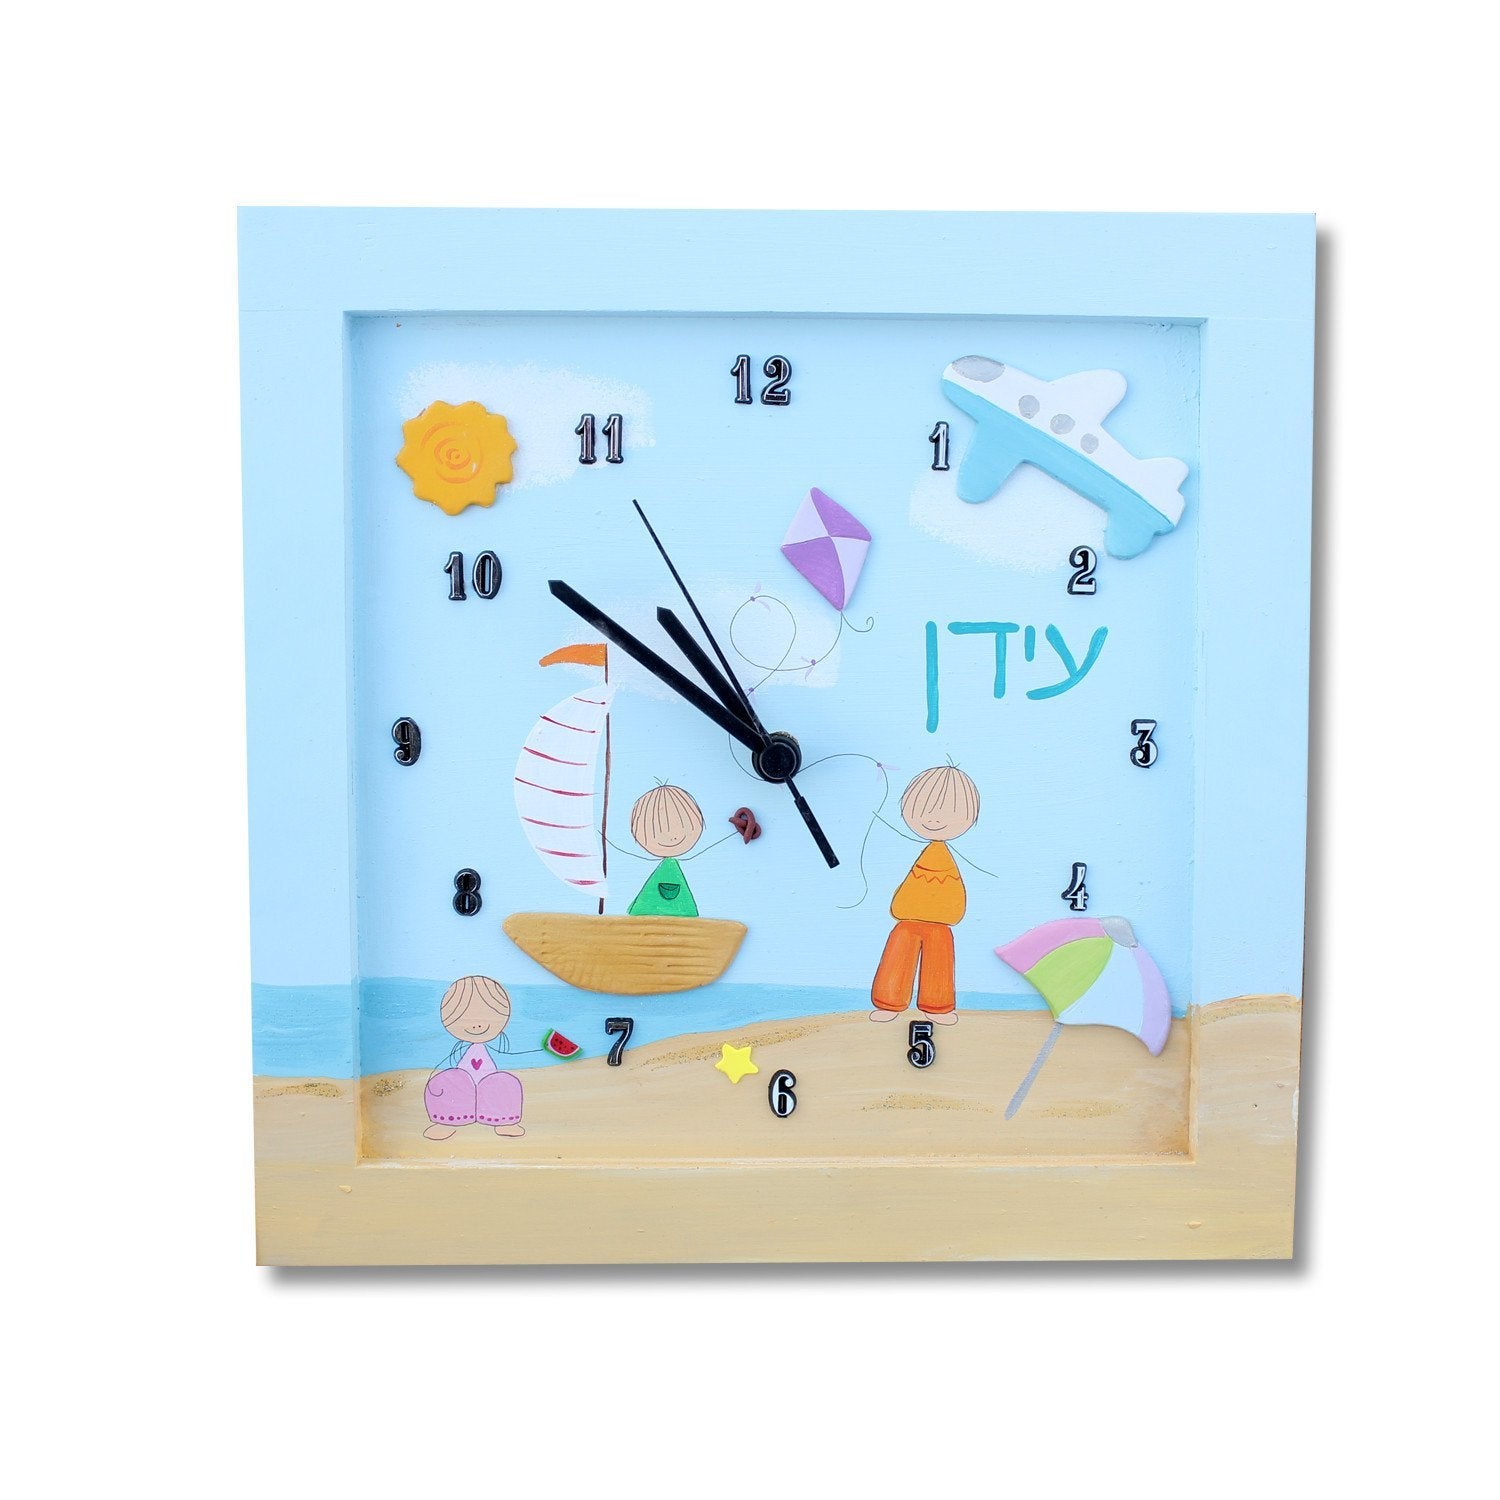 Sharon Goldstein Happy Judaica Clock Sailor Kids in the Sea Personalized Children's Wall Clocks in Hebrew or English